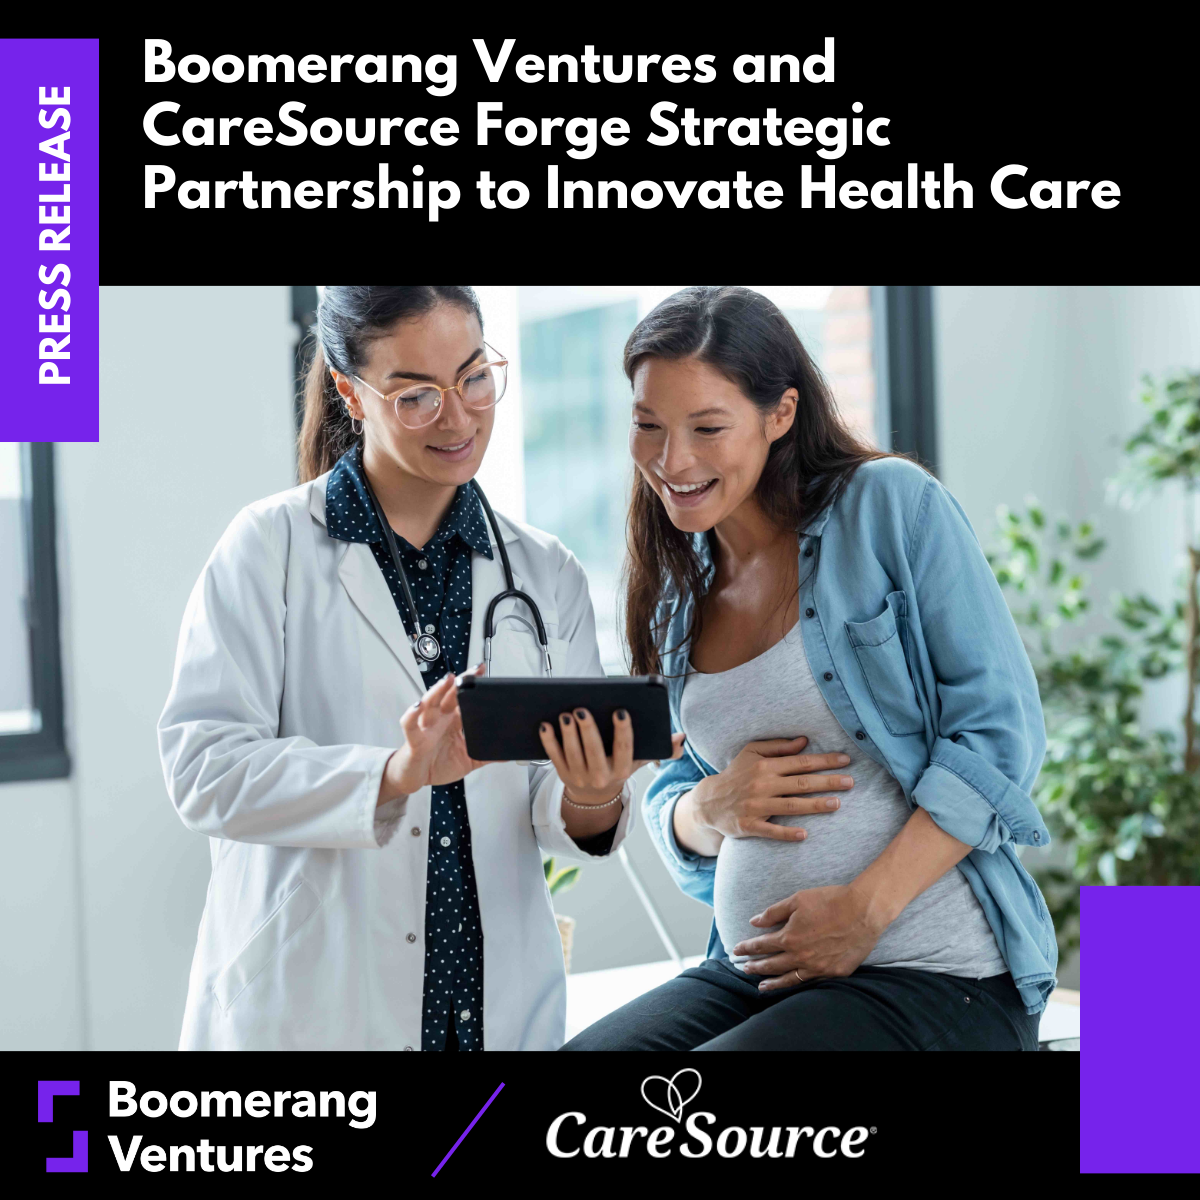 Press Release: Boomerang Ventures and CareSource forge strategic partnership to innovate health care